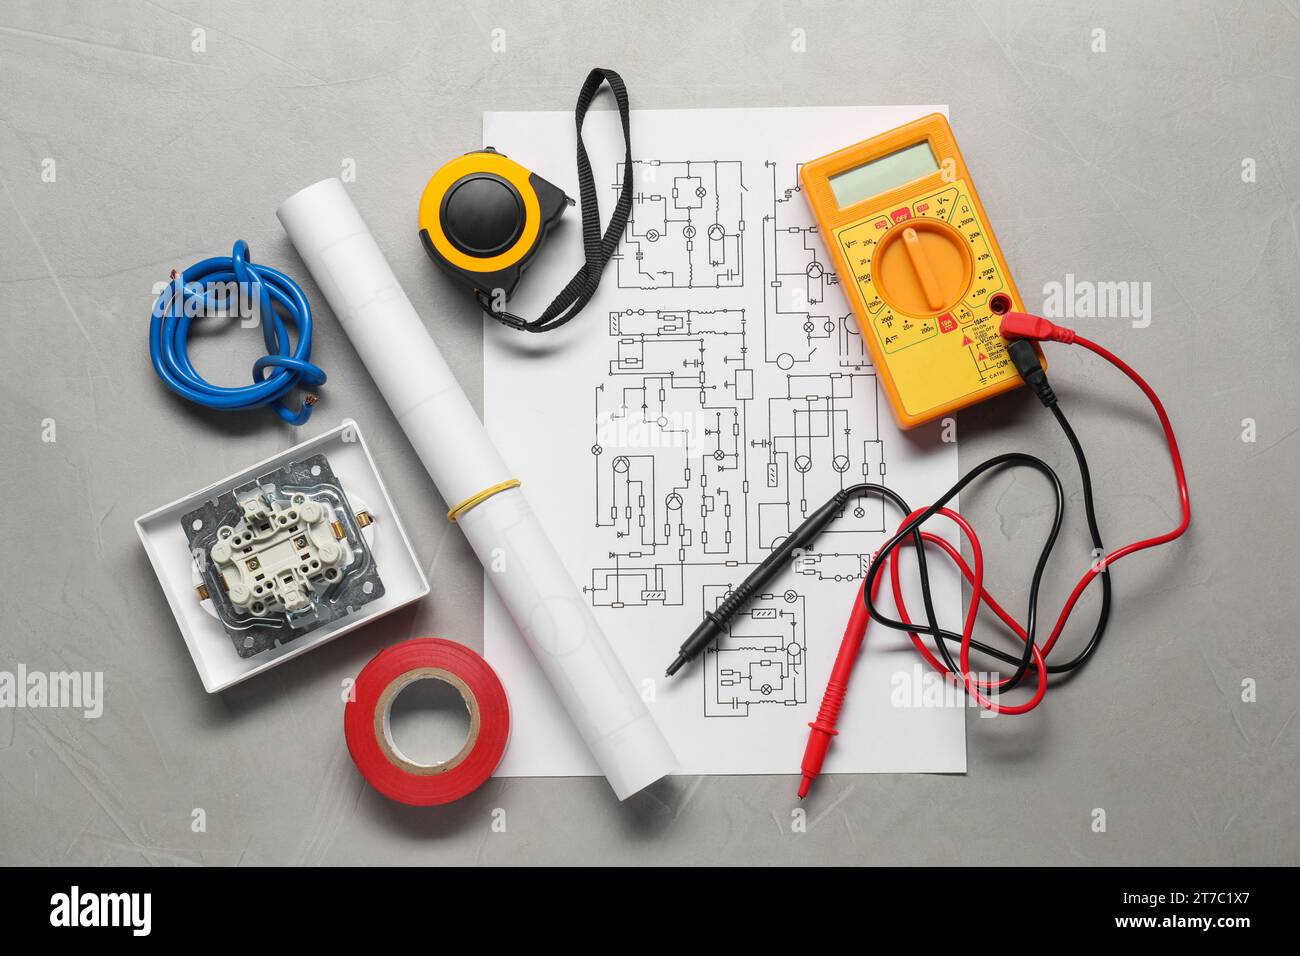 Wiring diagram, wires and digital multimeter on light grey table, flat lay Stock Photo